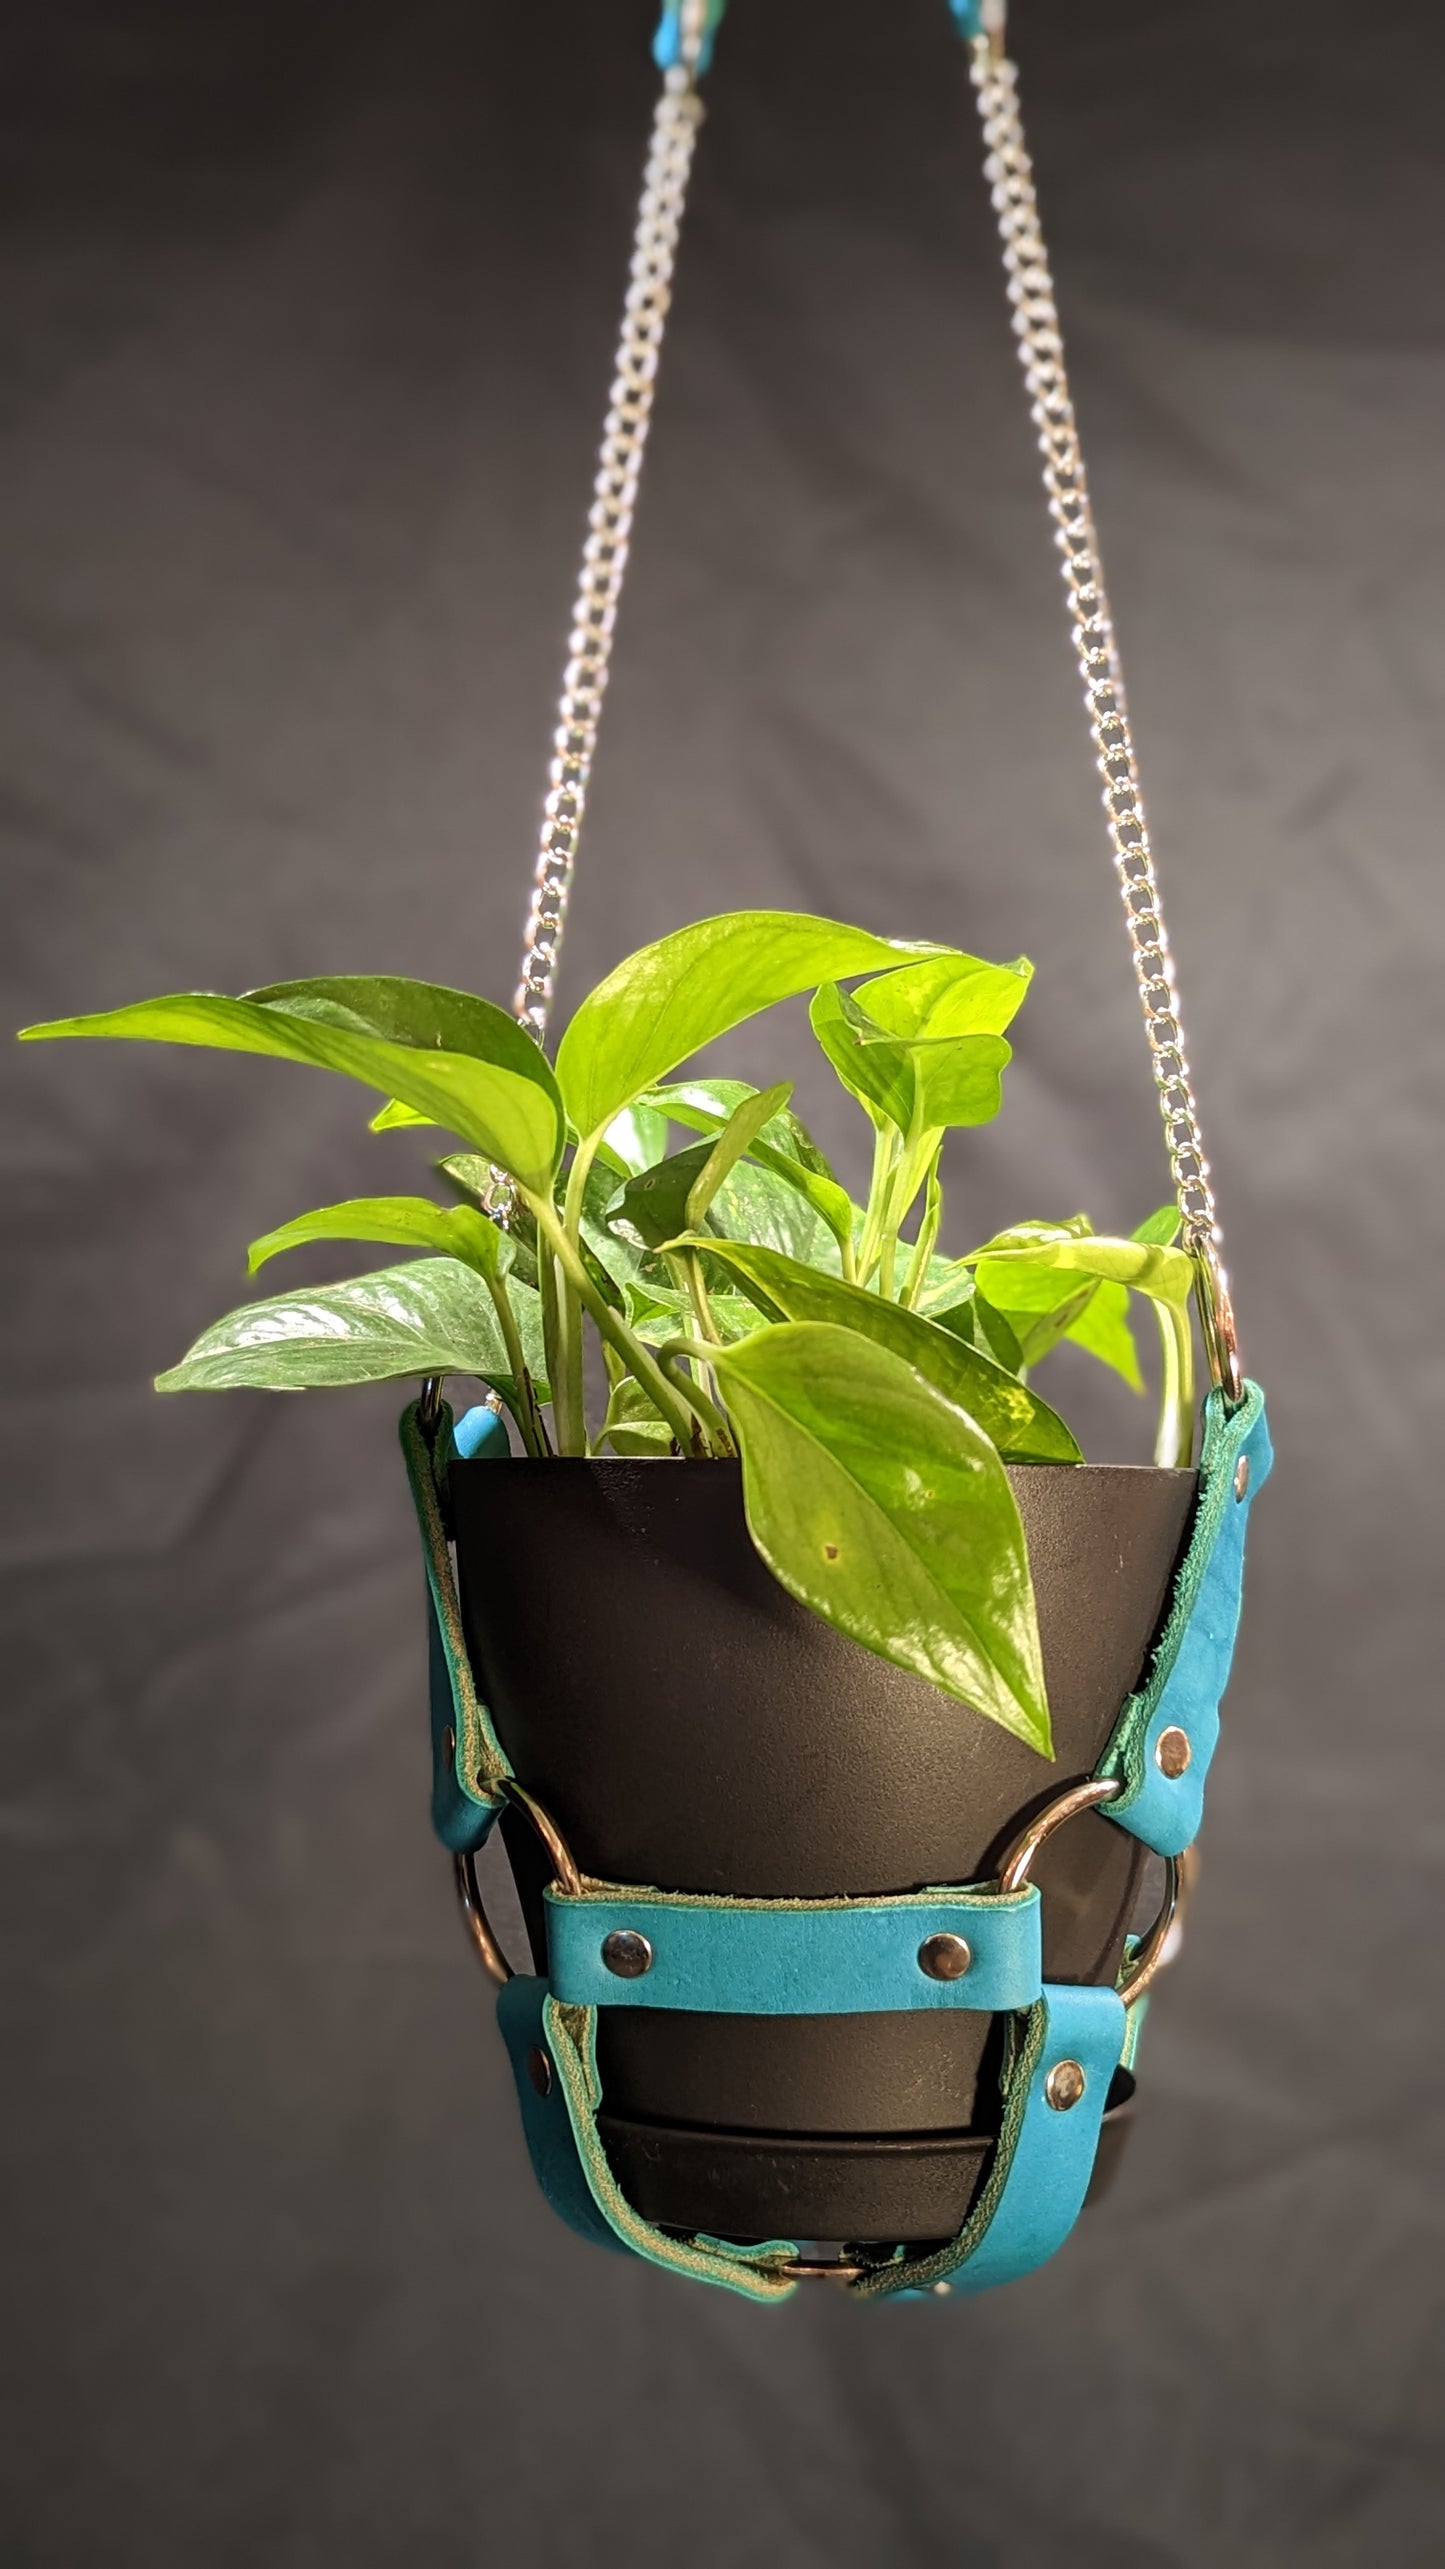 Teal leather plant hanger with silver hardware and chain. It is holding a 6" black plant pot with a golden pothos plant.